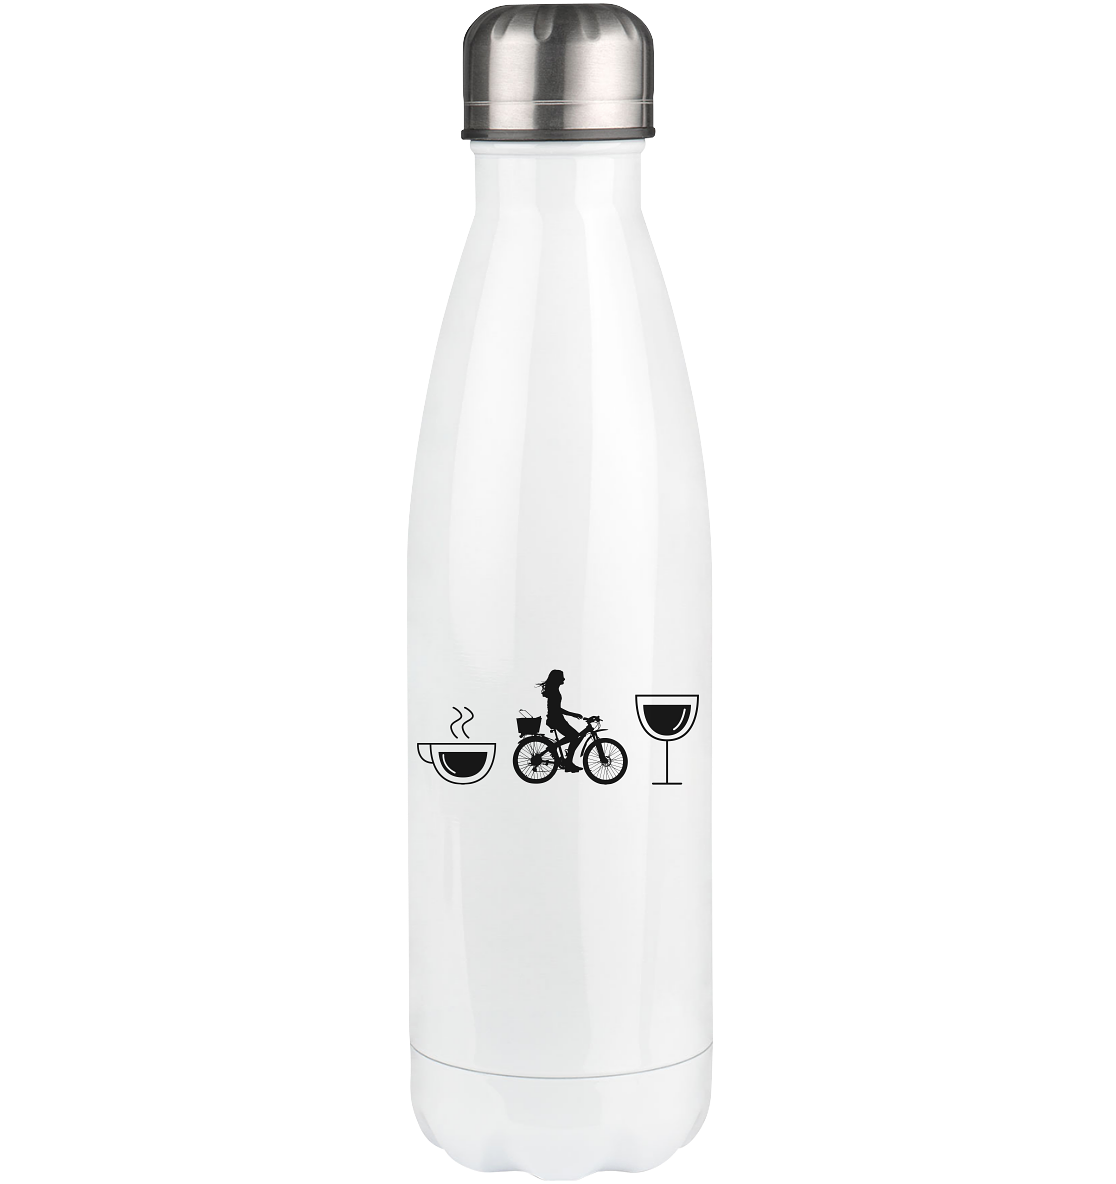 Coffee Wine and Cycling - Edelstahl Thermosflasche fahrrad 500ml